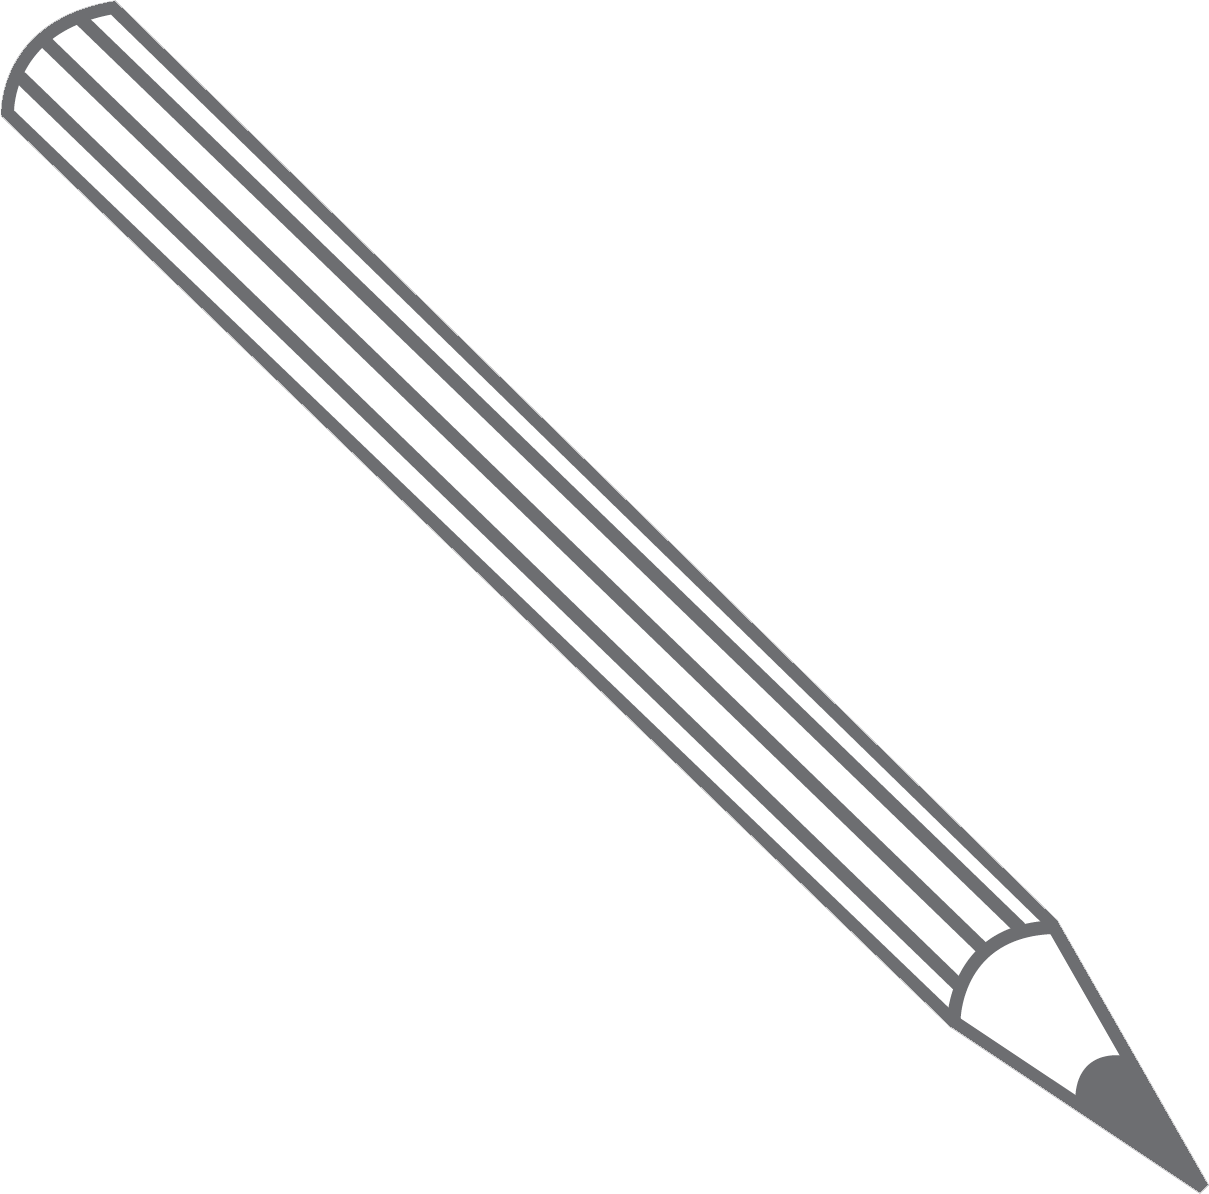 The outline of a pencil